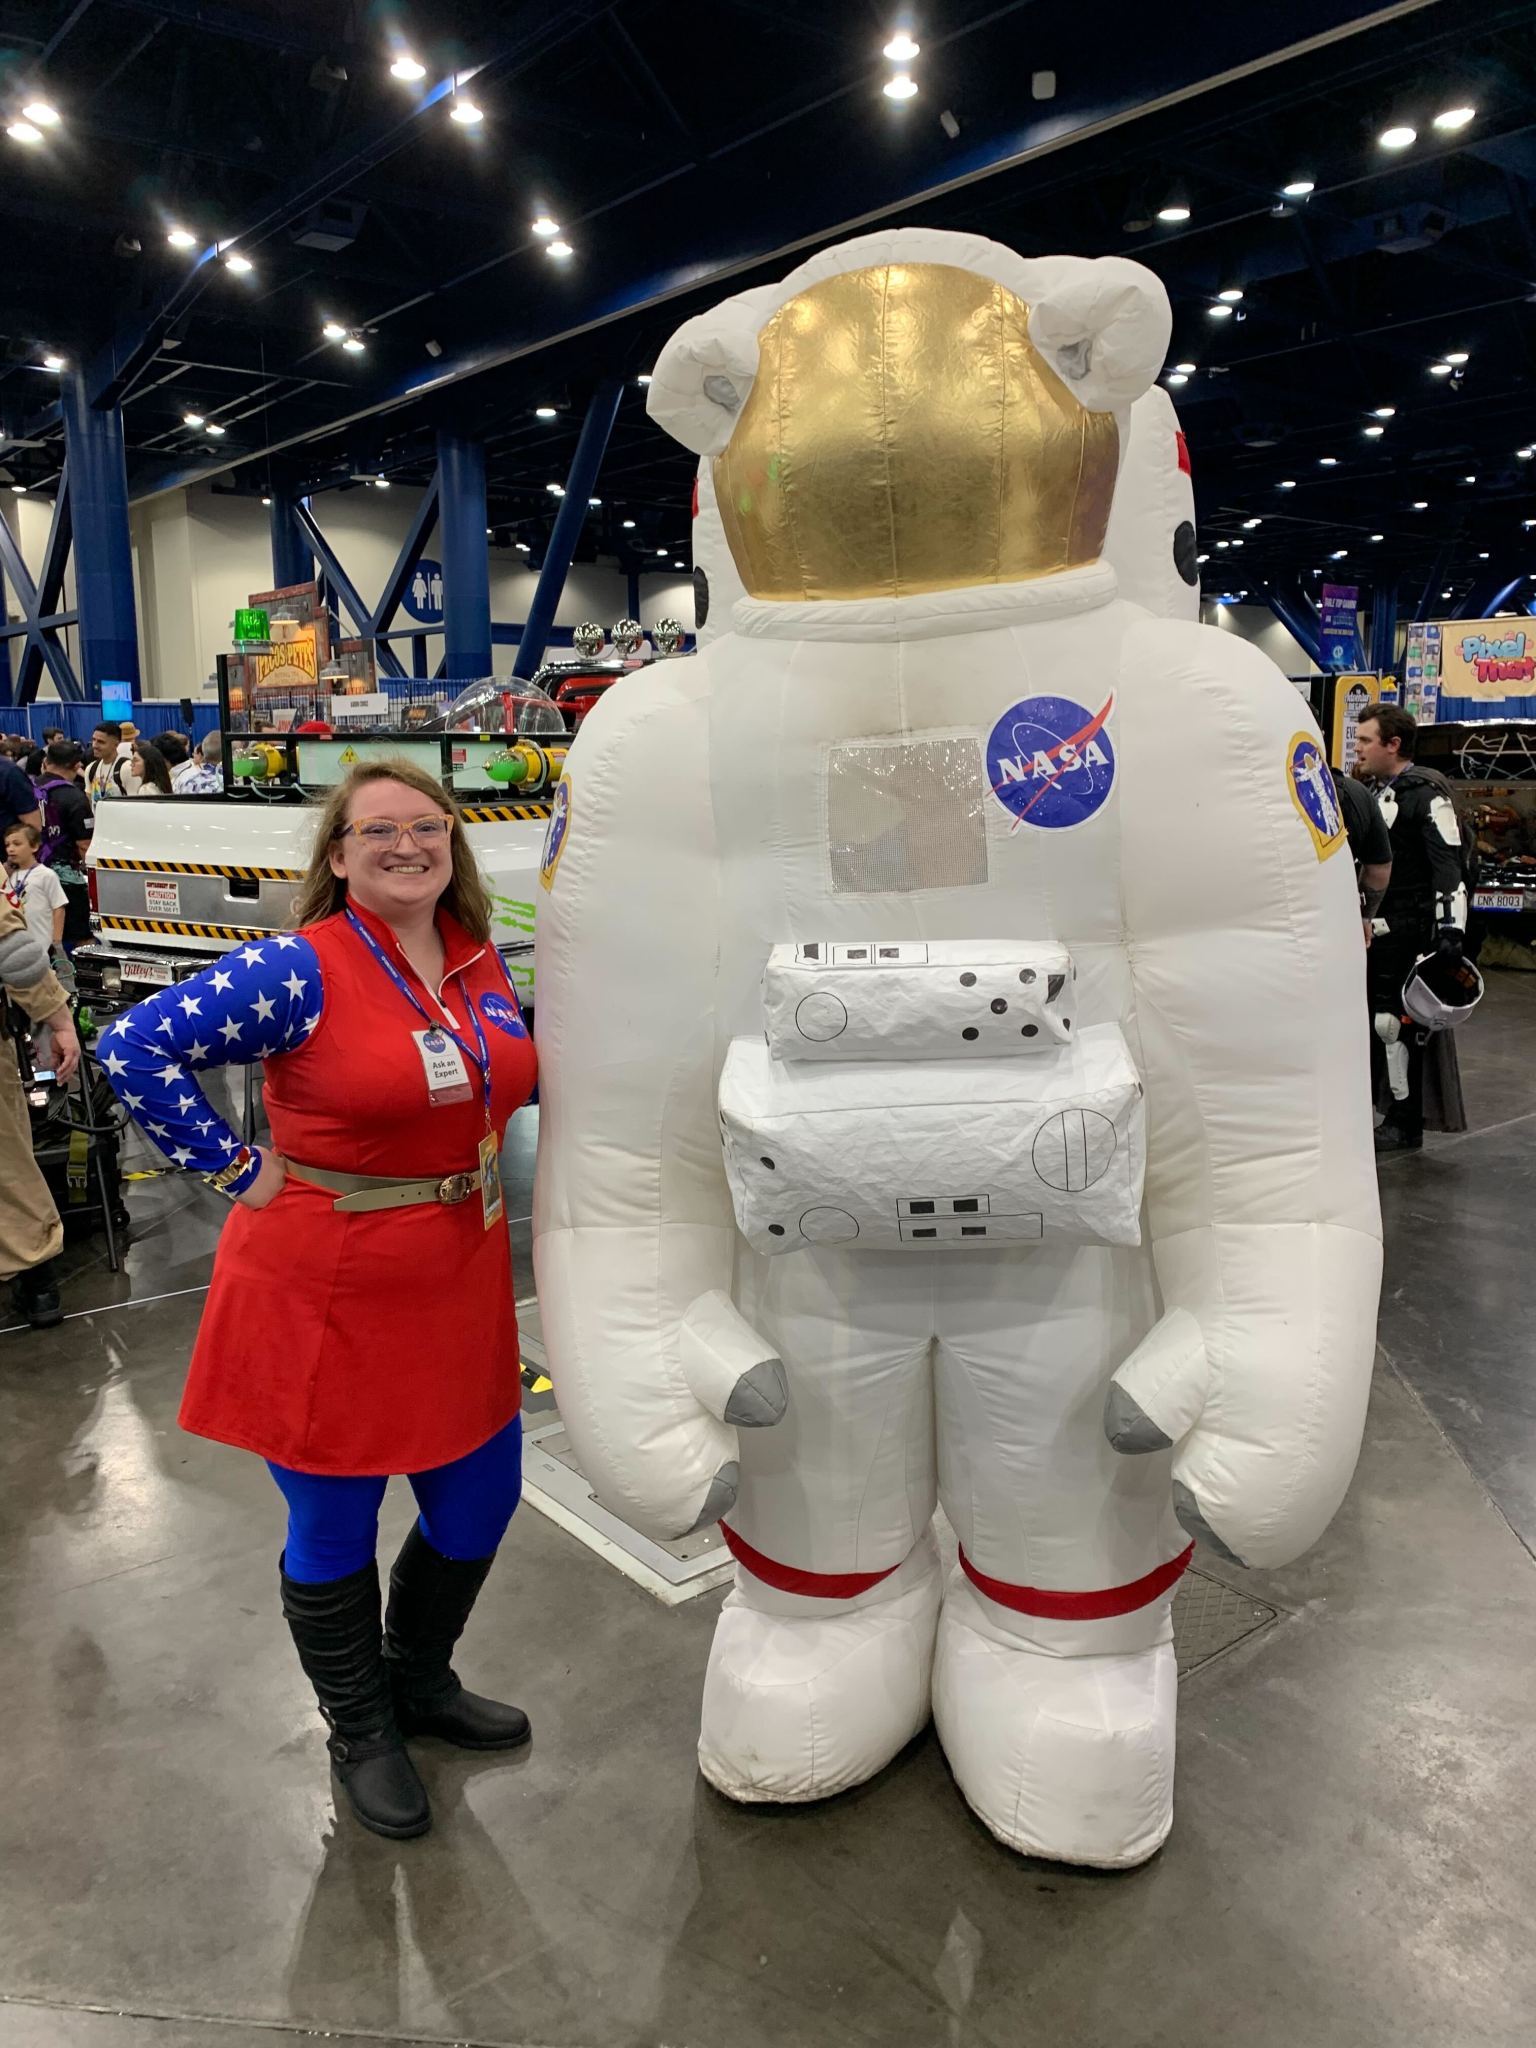 A woman wearing a red, white, and blue dress stands next to an inflatable astronaut mascot at Comicpalooza.